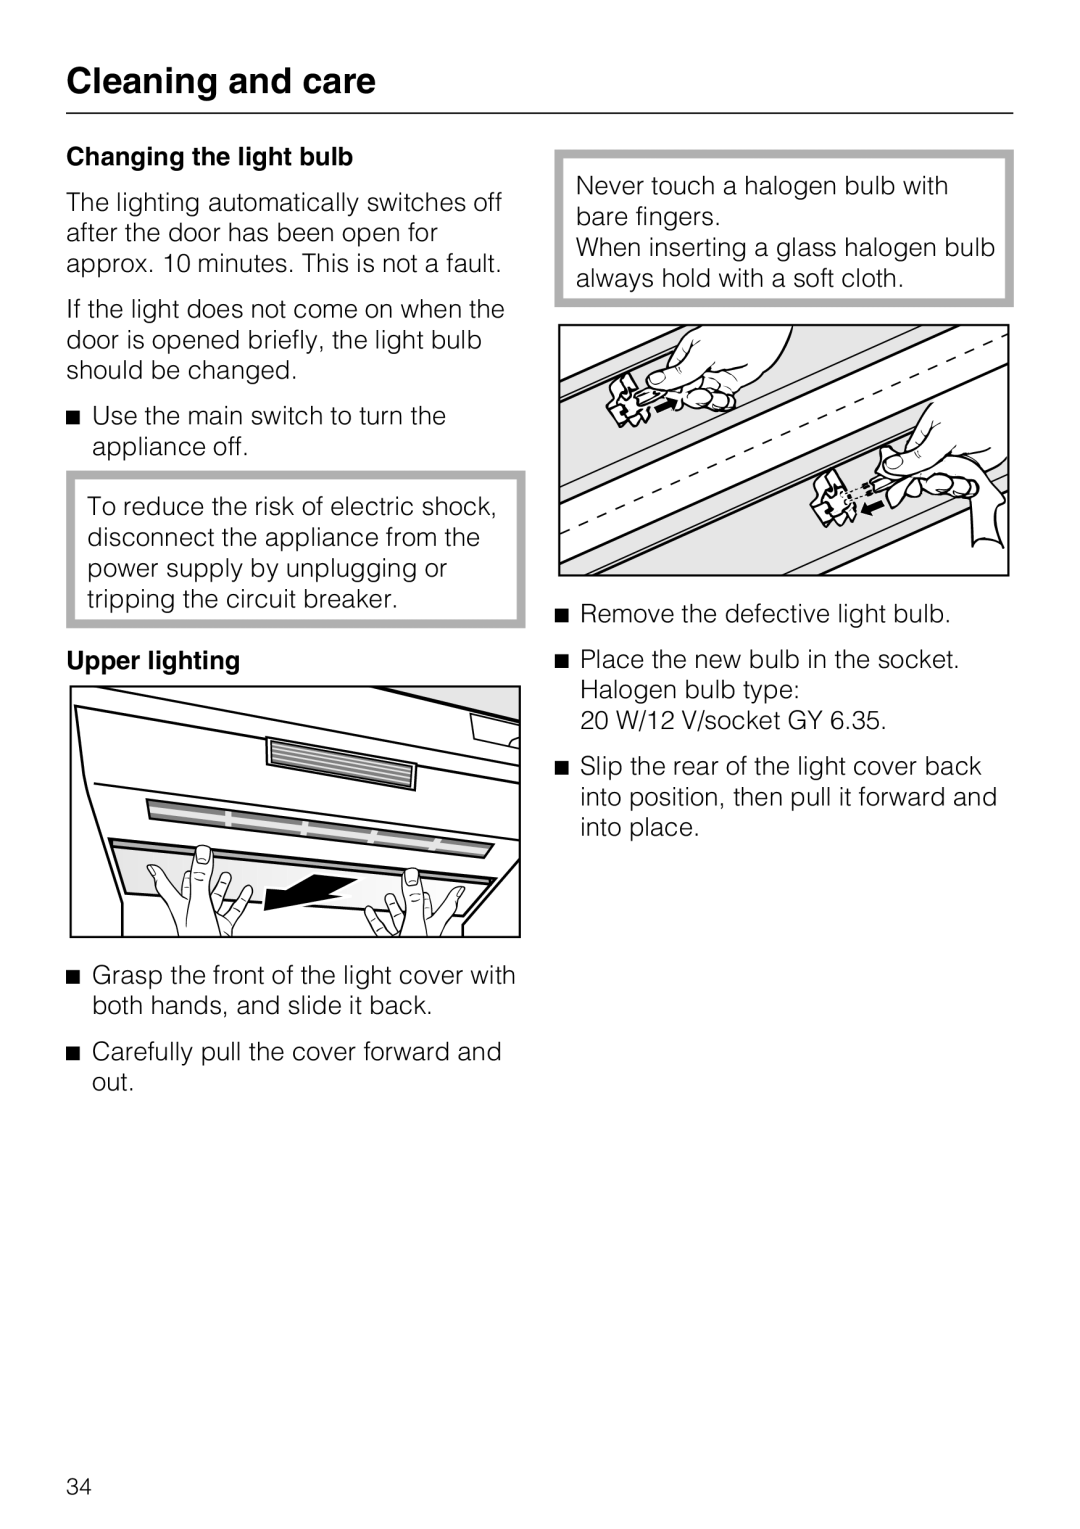 Miele F1471VI installation instructions Cleaning and care, Changing the light bulb, Upper lighting 